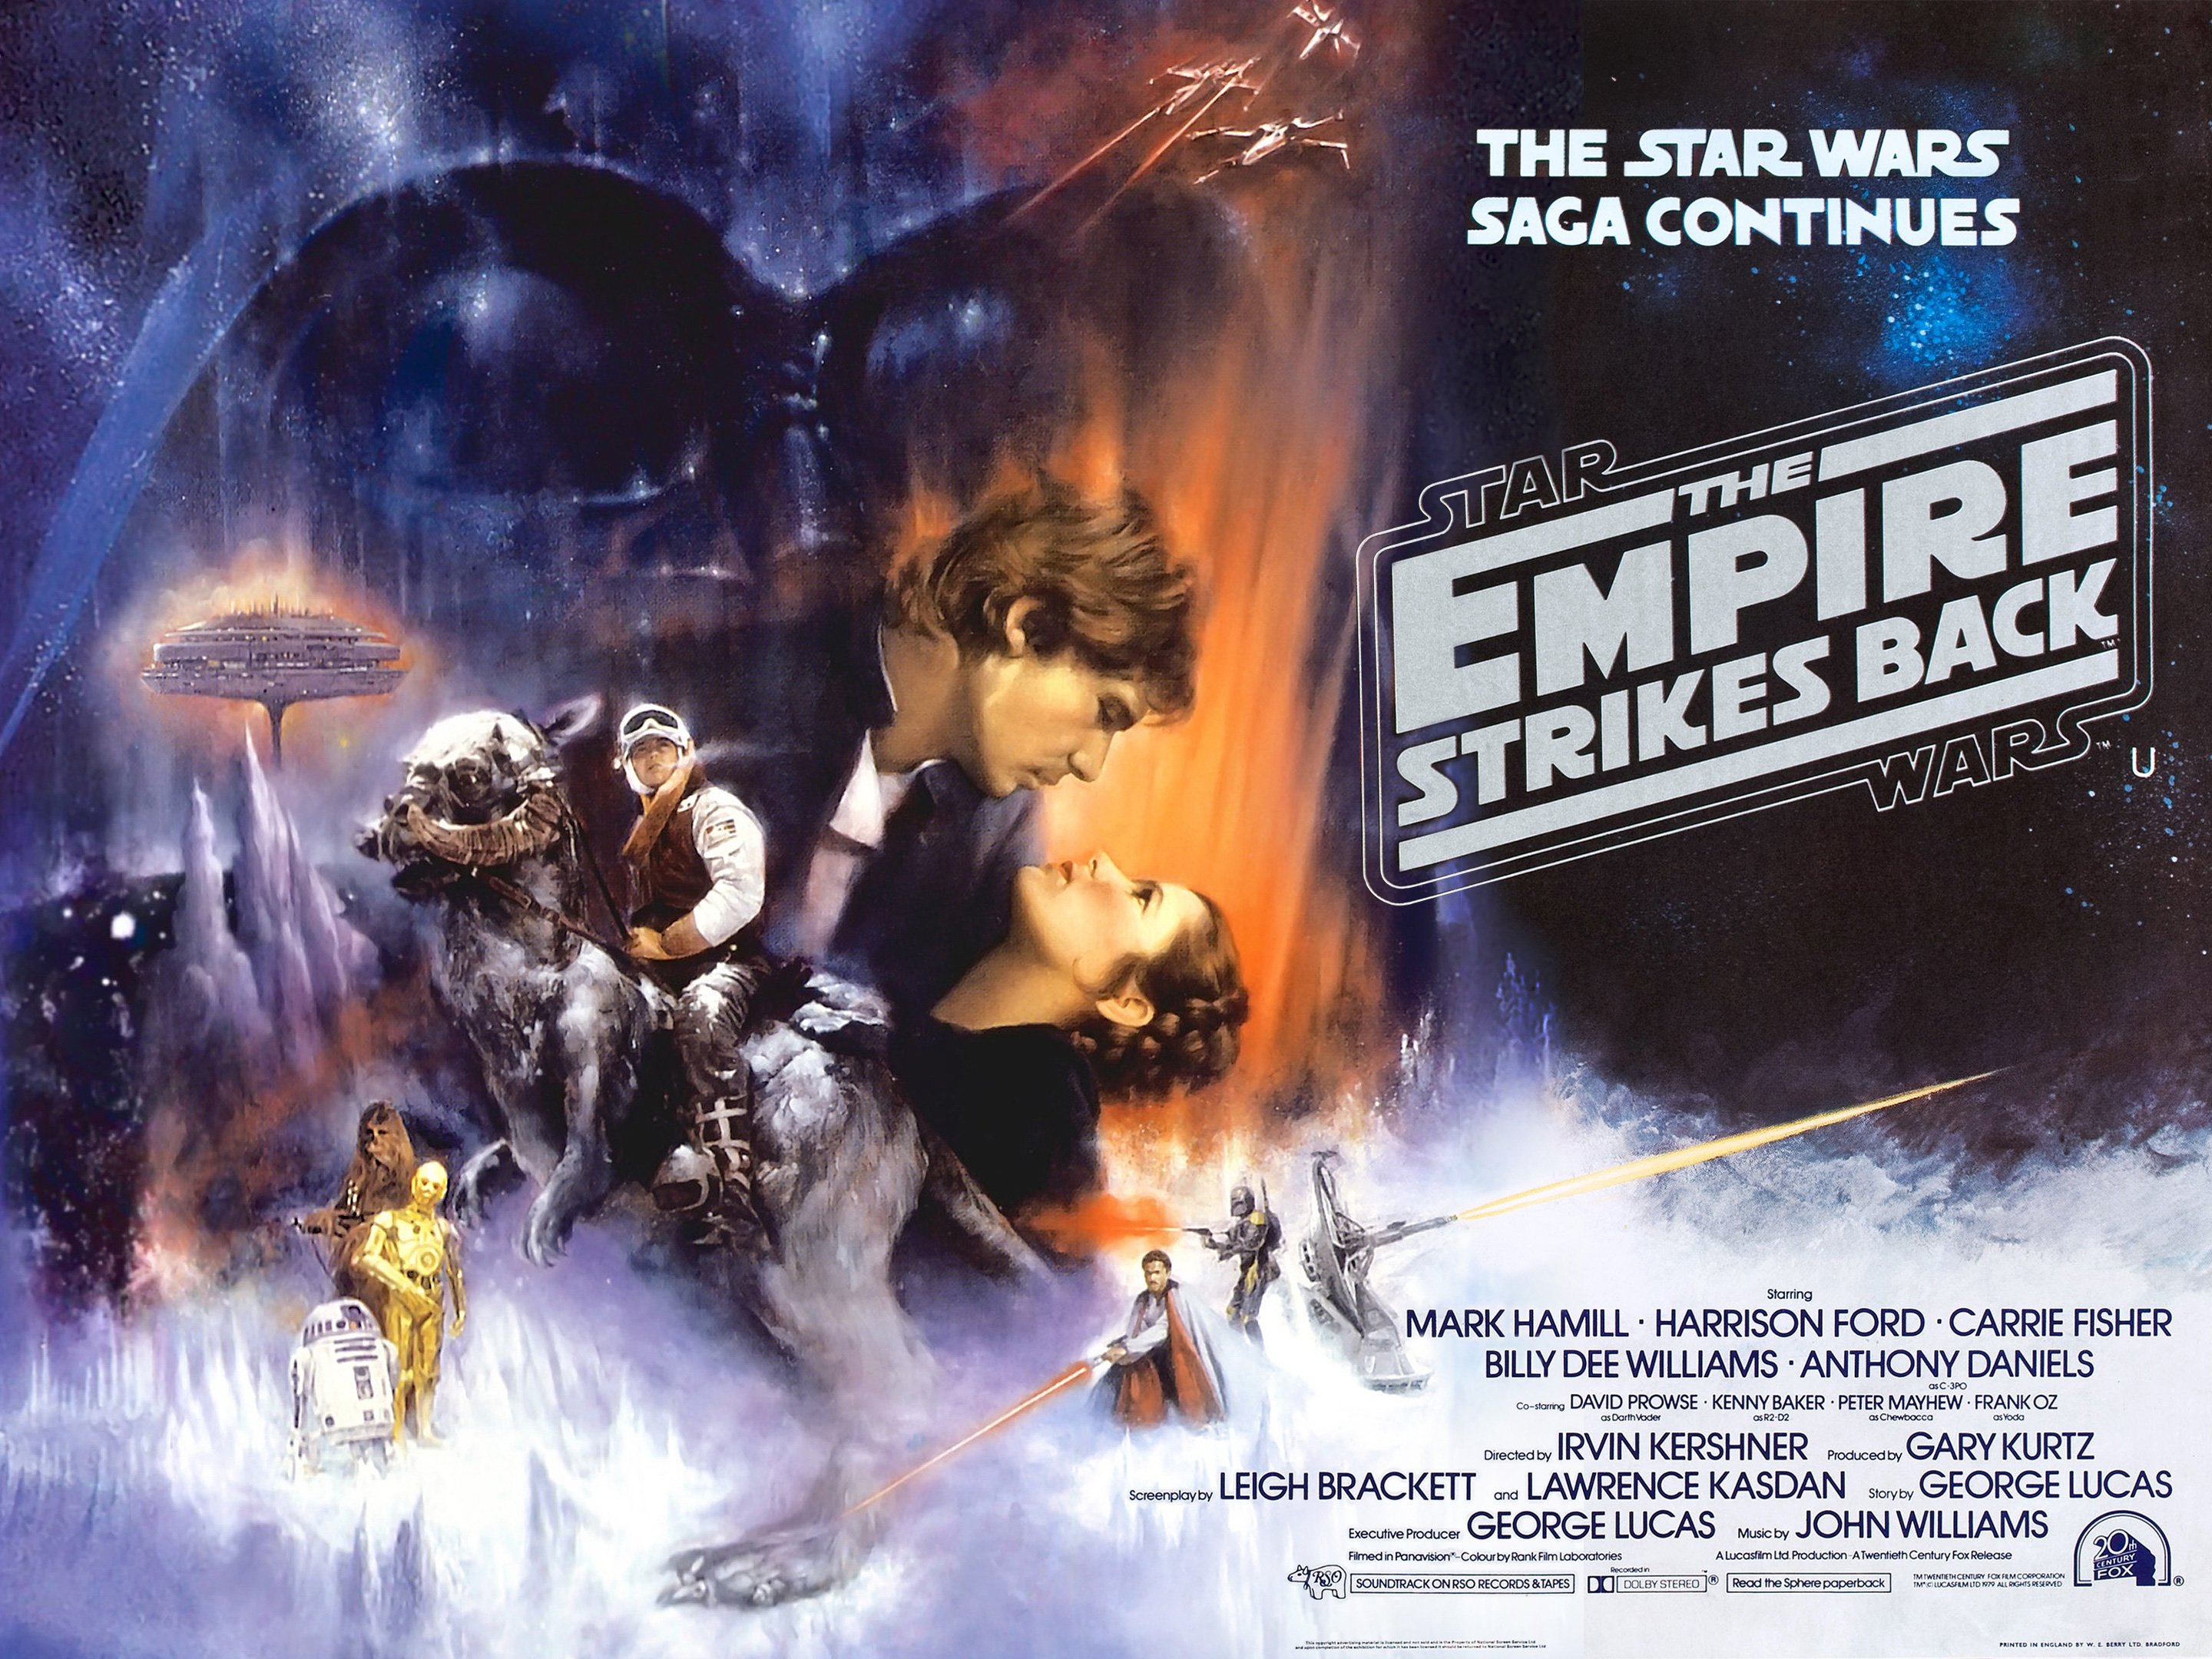 Star Wars Episode v The Empire Strikes Back - Movie Wallpapers ...